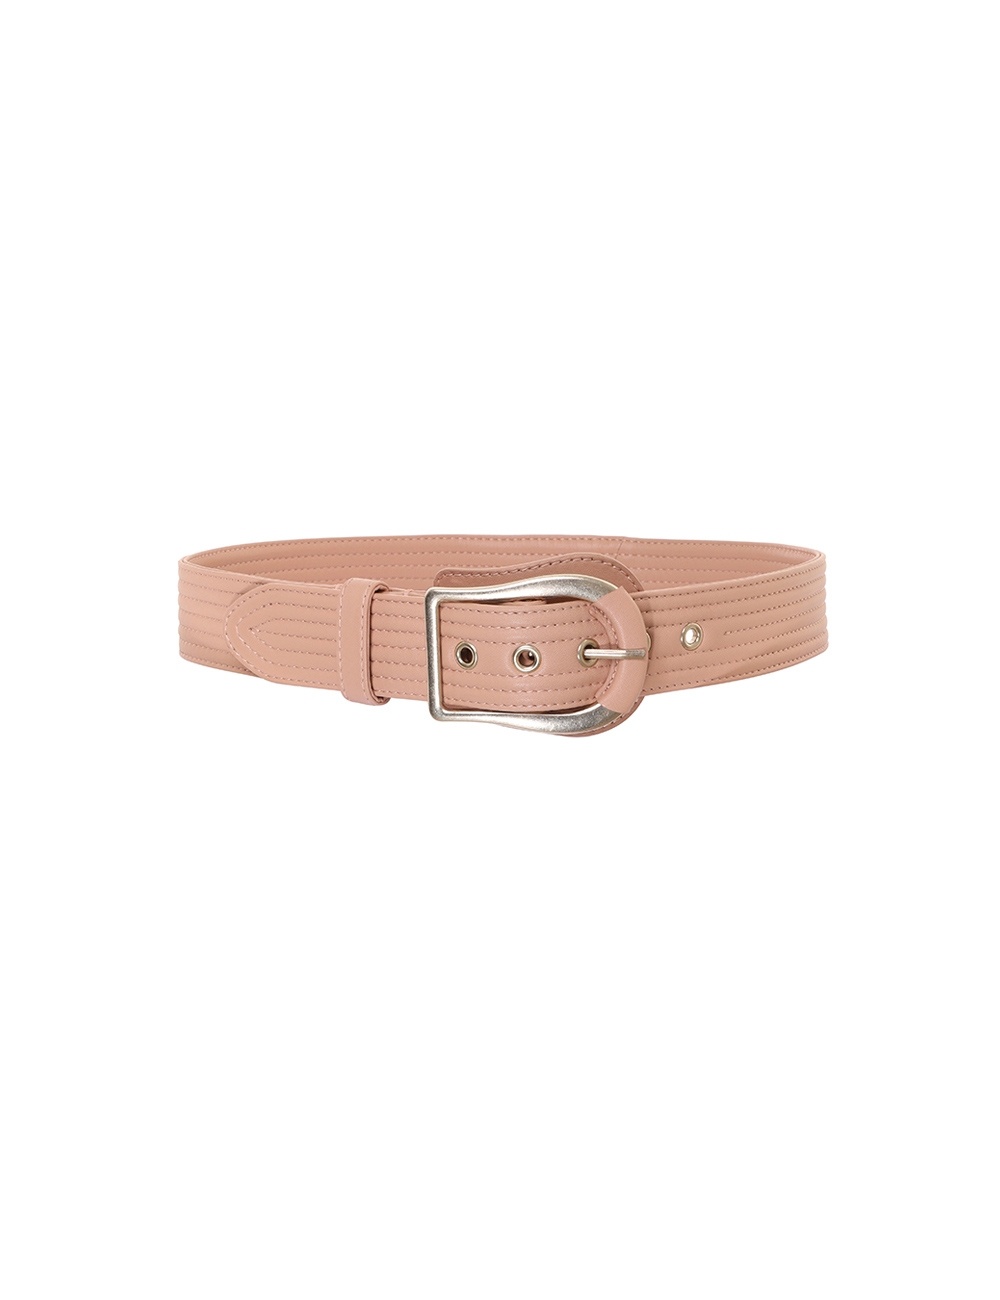 QUILTED LEATHER BELT - 1